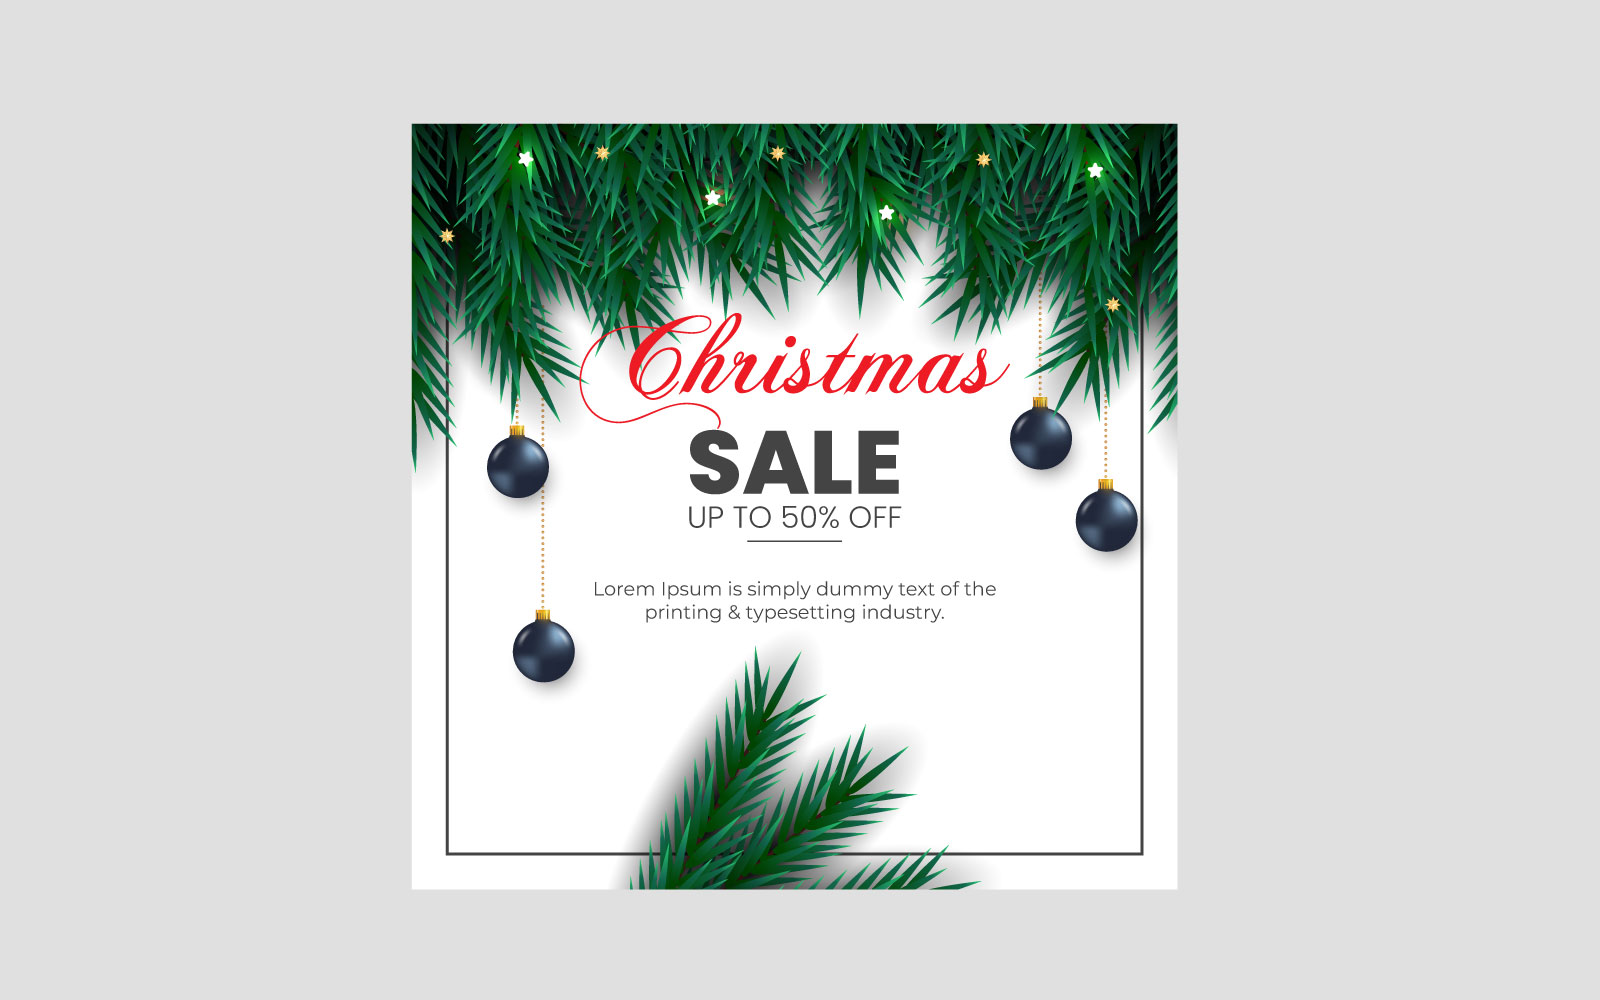 Merry Christmas sale post decoration with christmas ball pine branch and stars